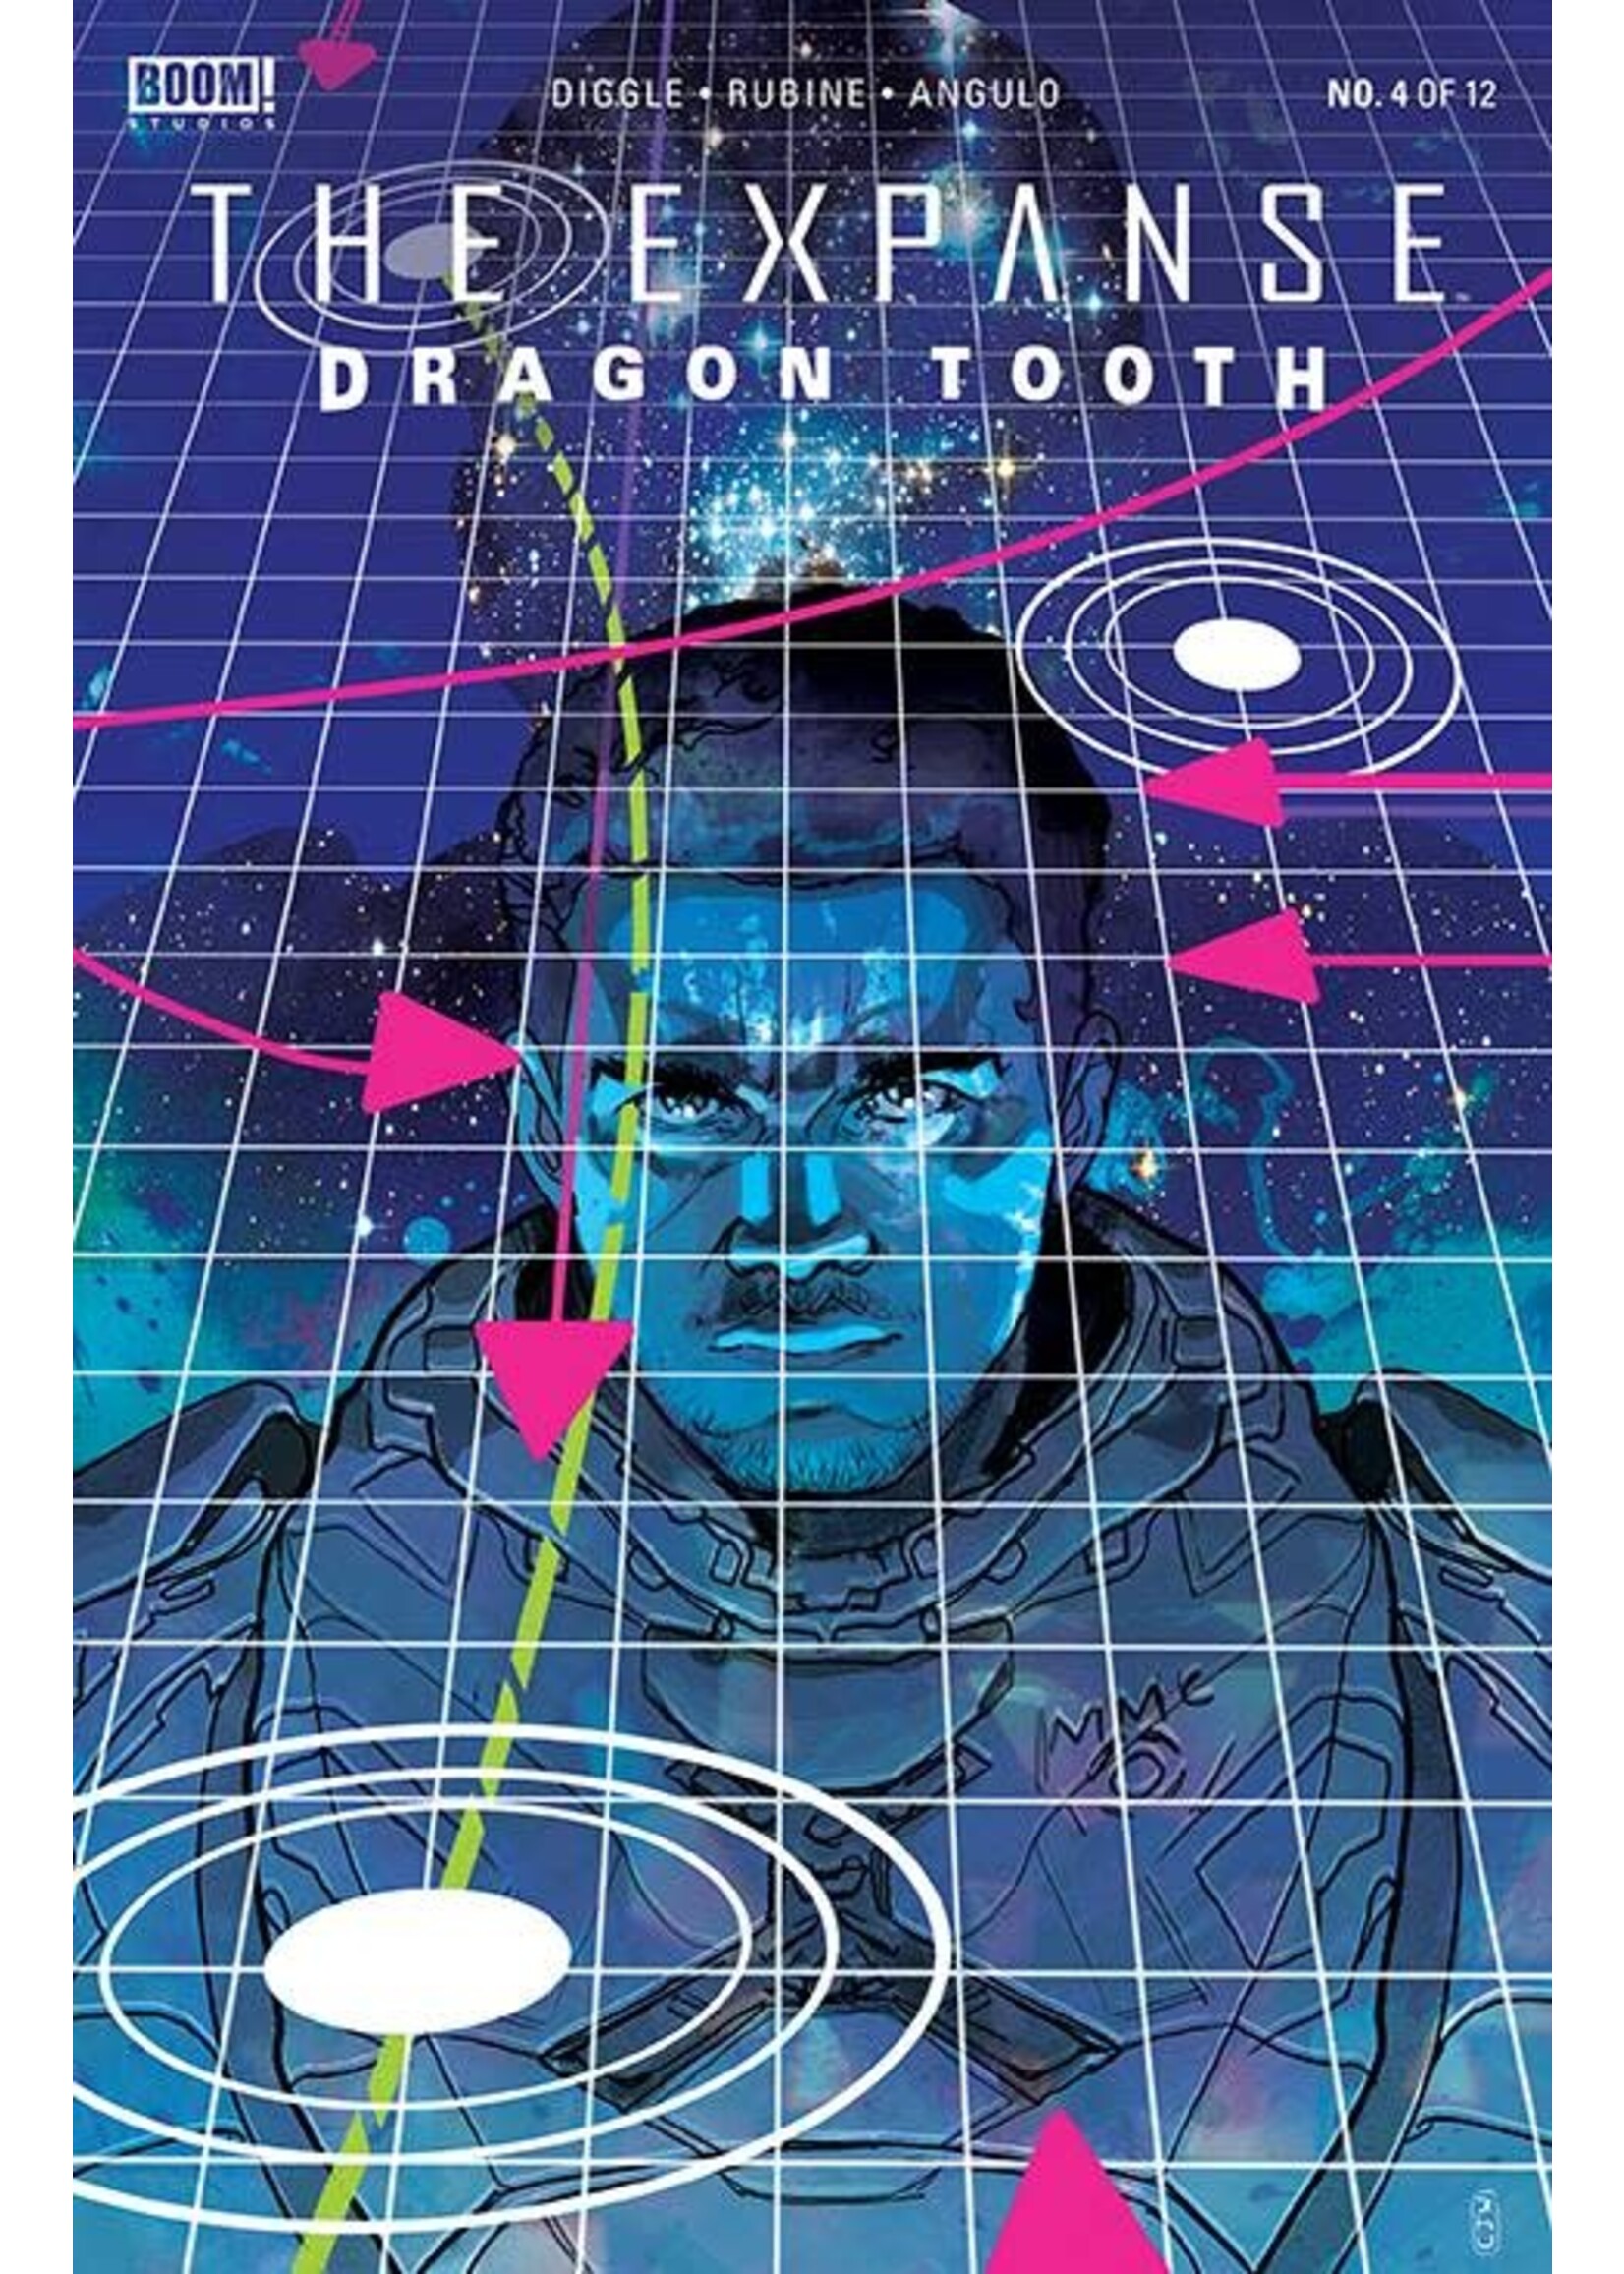 BOOM! STUDIOS EXPANSE THE DRAGON TOOTH #4 (OF 12) CVR A WARD